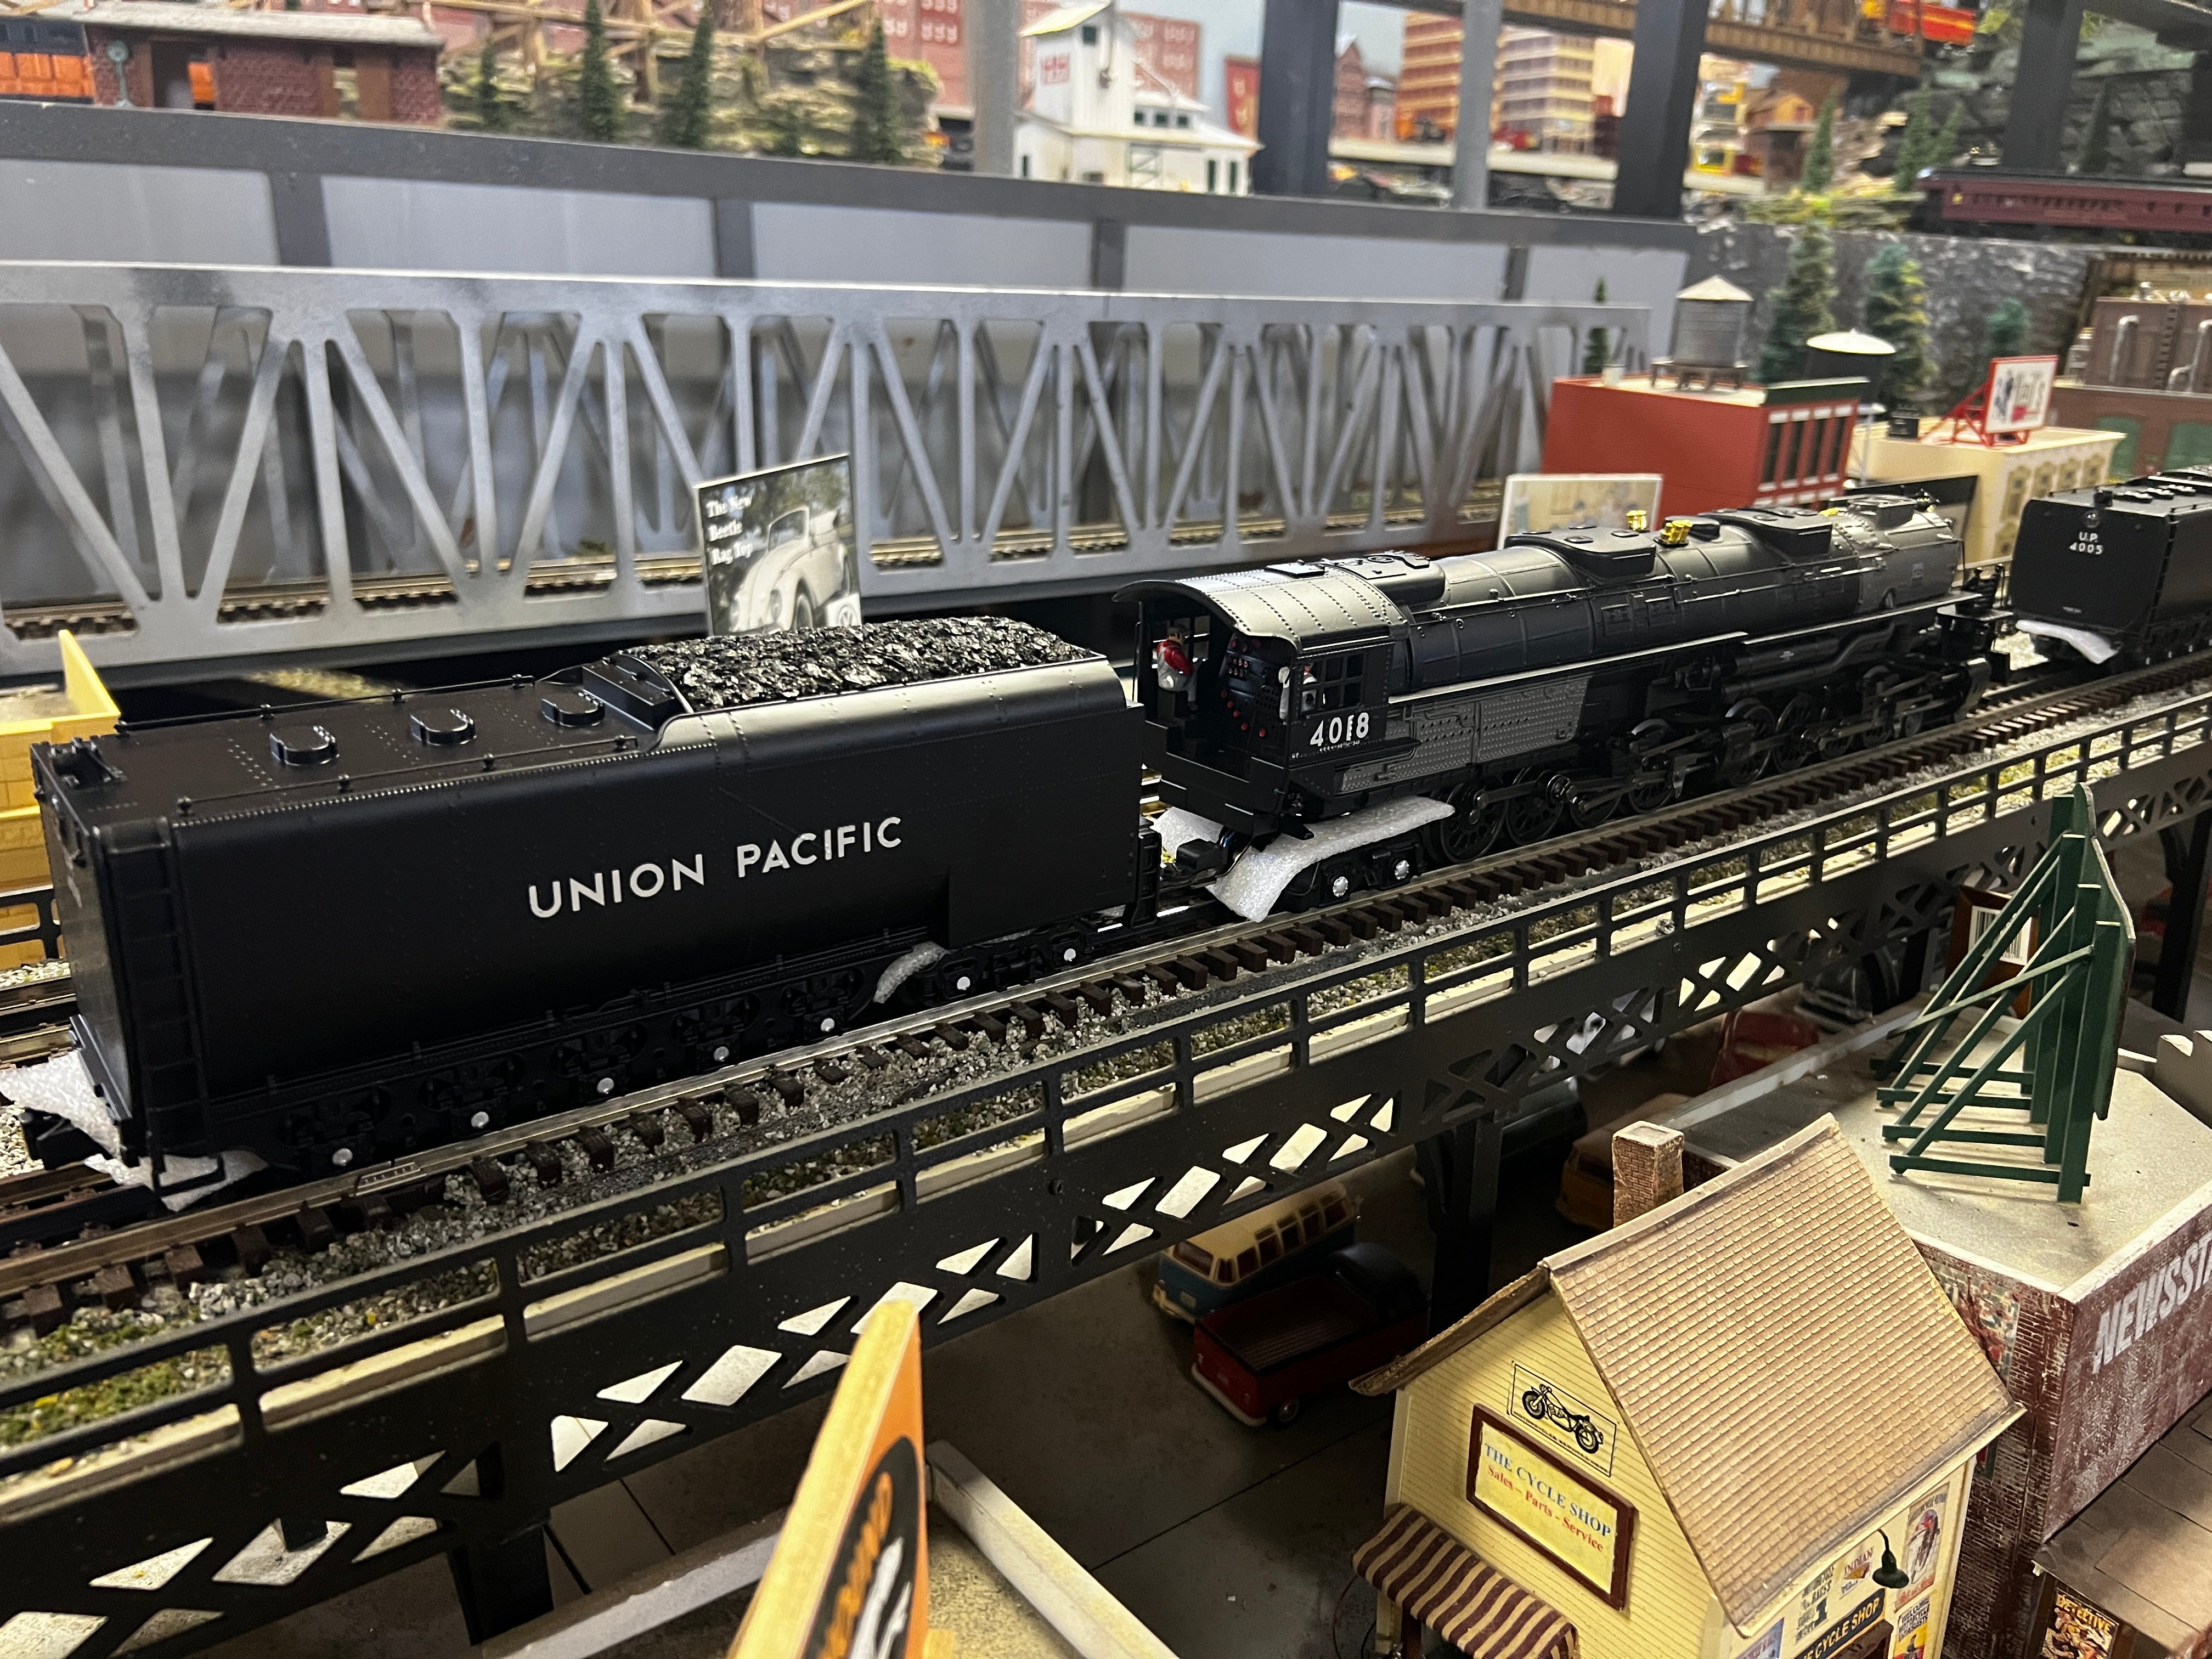 MTH 30-1843-1 - 4-8-8-4 Imperial Big Boy Steam Engine "Union Pacific" #4018 w/ PS3 (Coal Tender)